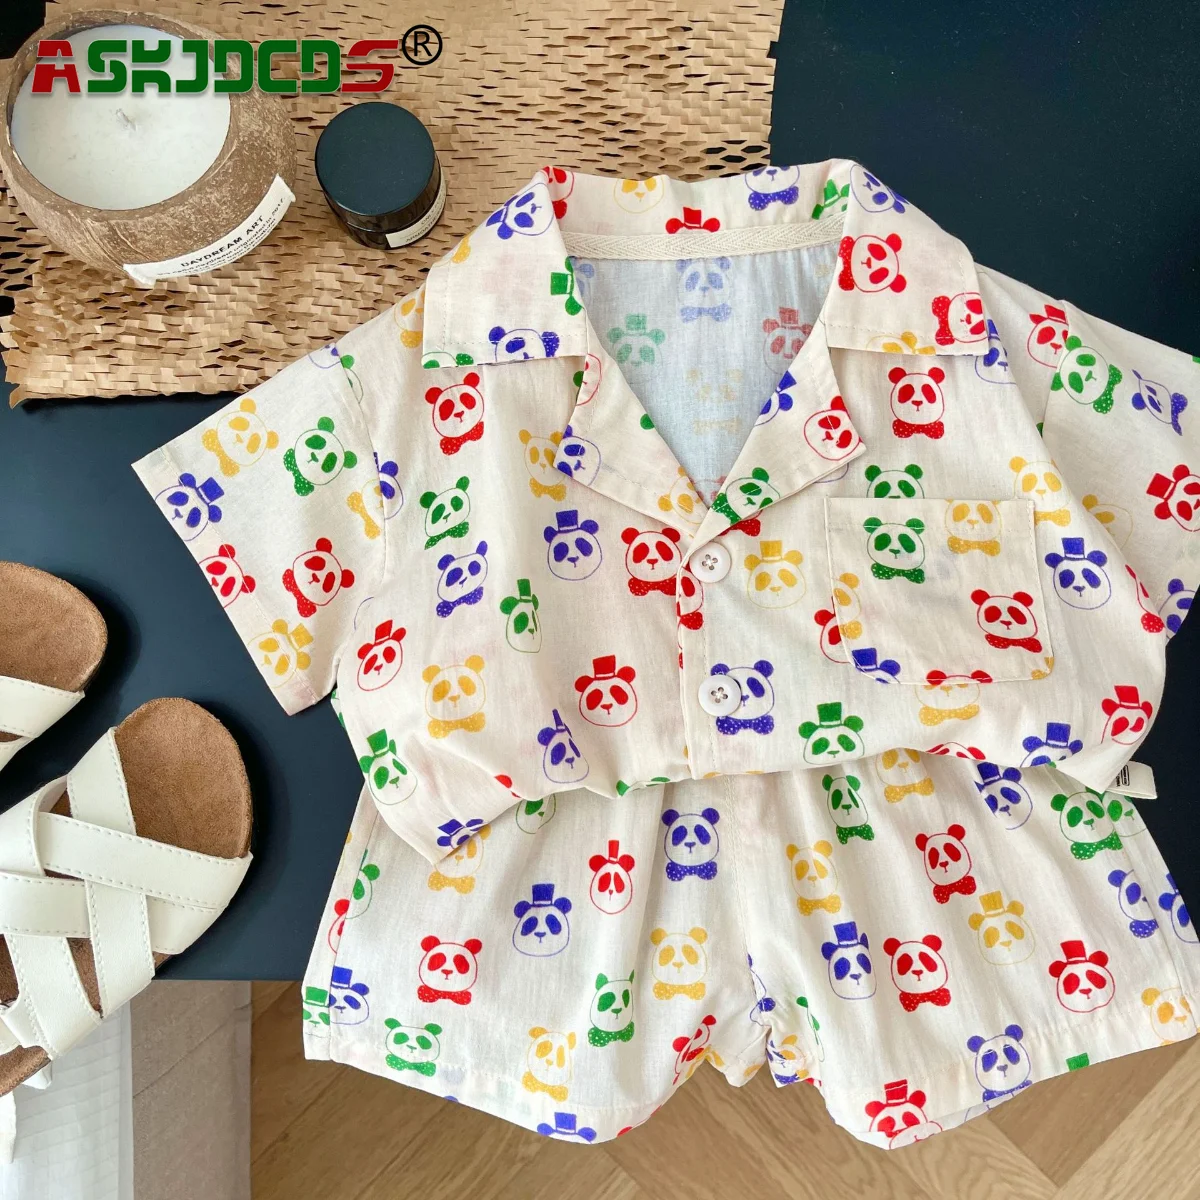 

Kids Baby Children Clothes Fashion Your Little Boy with Our Playful Panda Print Shirt+Shorts Set - Perfect for Summer Fun